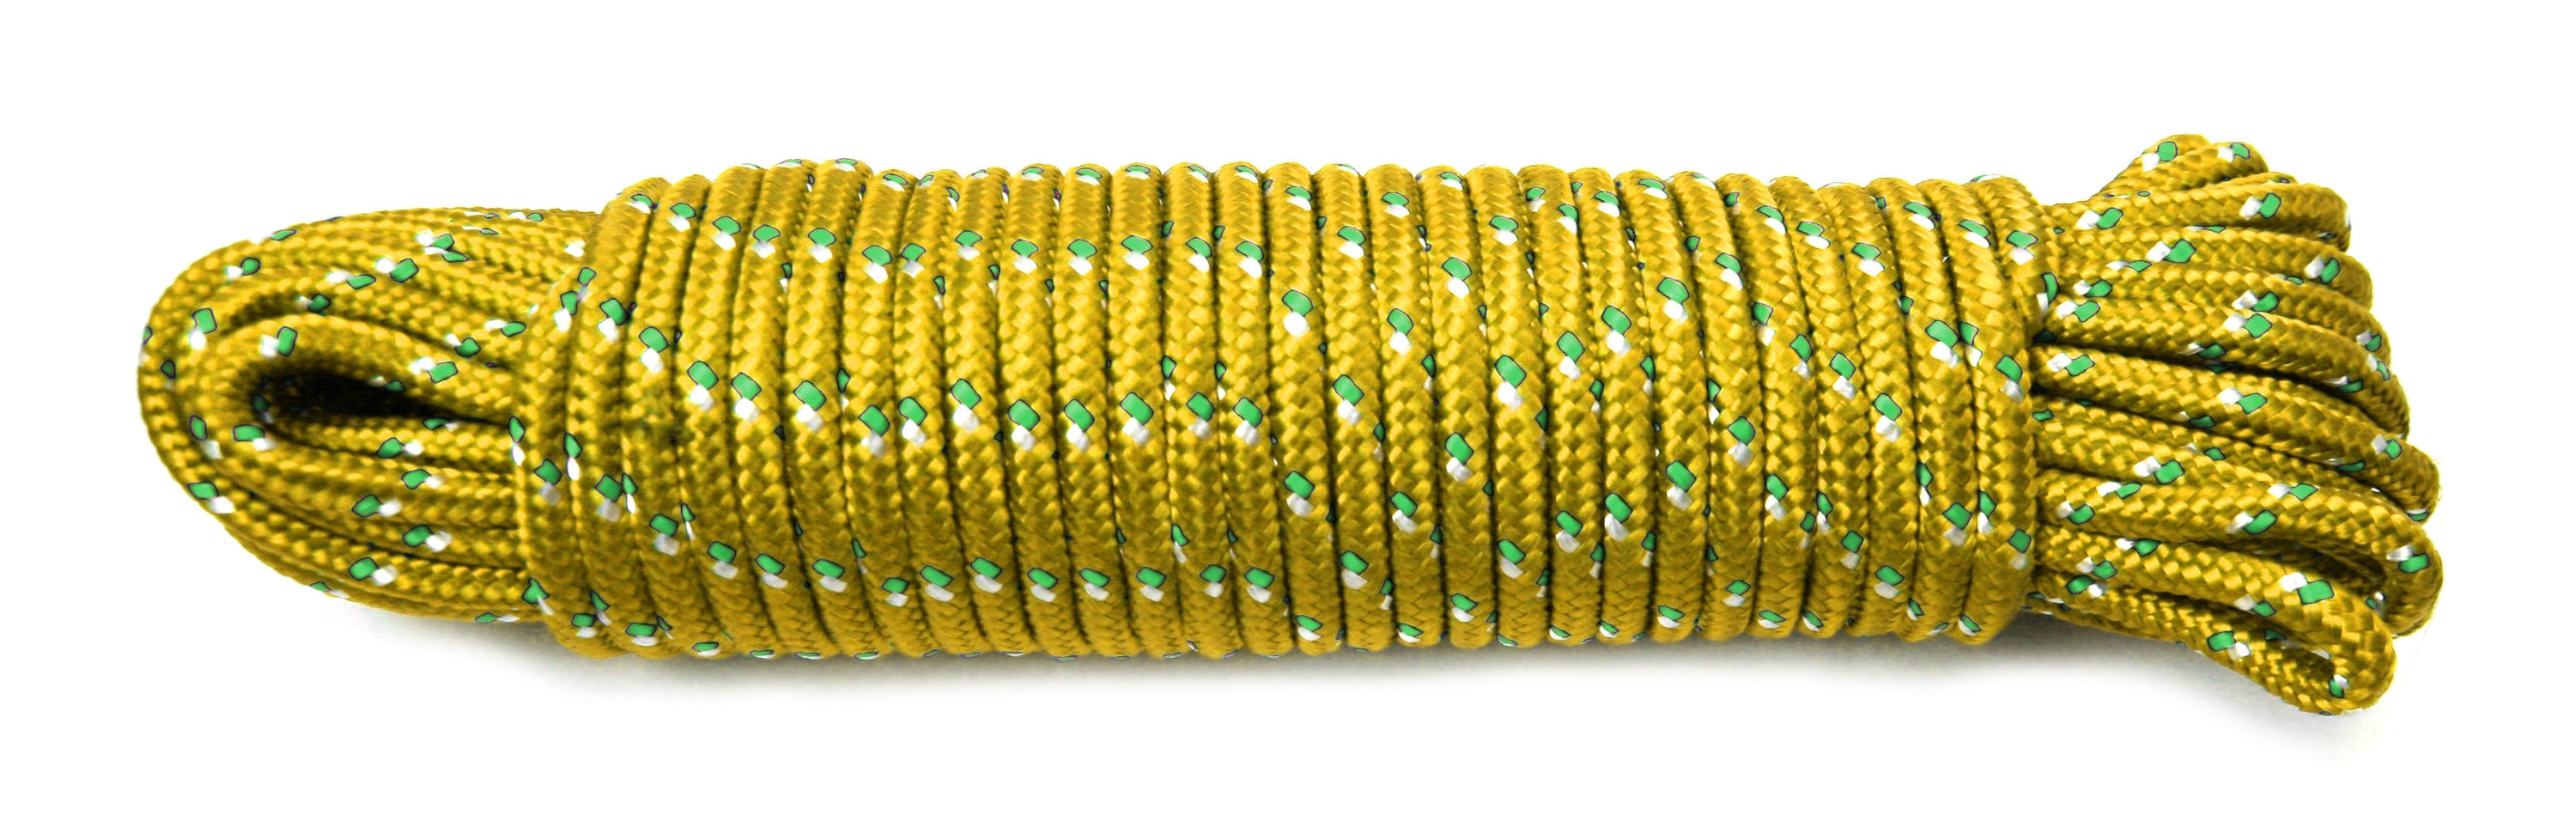 40 Foot Long Packaged Rope at